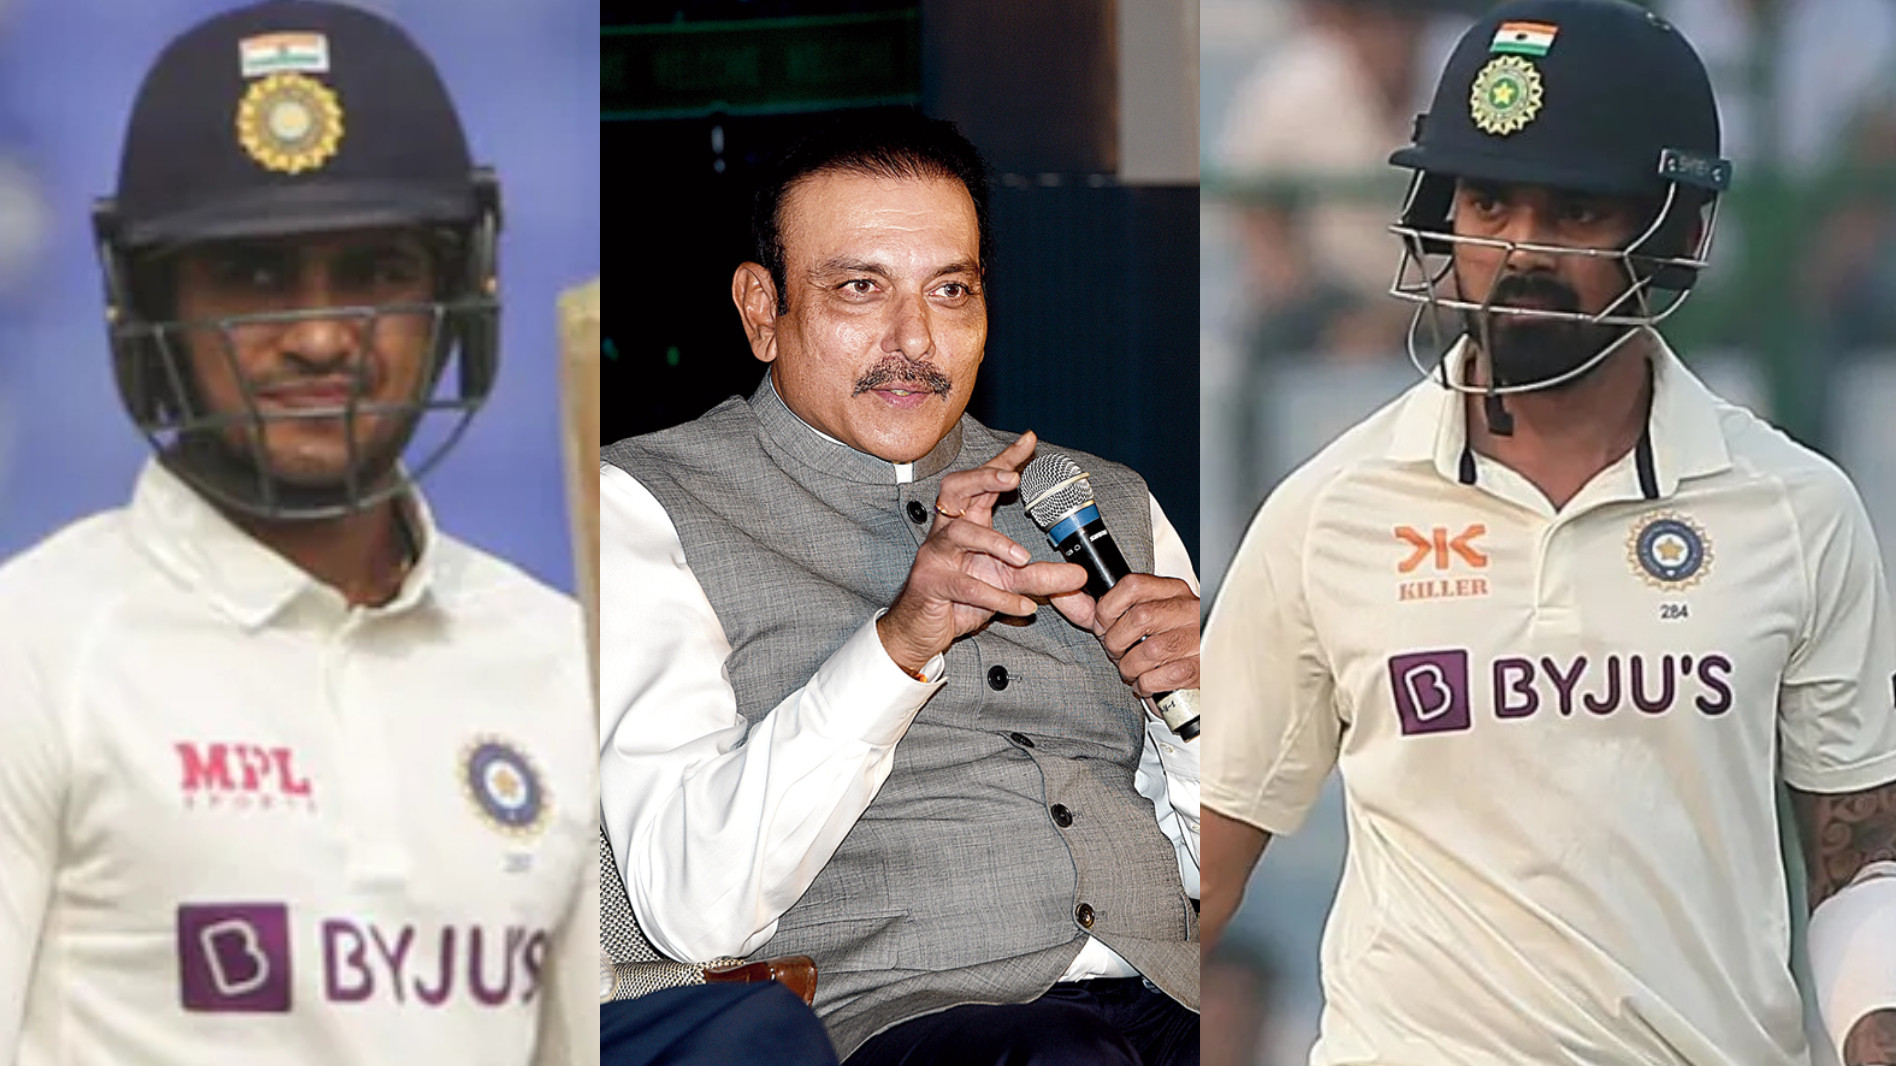 IND v AUS 2023: “You want someone like Gill, who's red hot”- Ravi Shastri’s blunt, brutal take on Rahul’s form and place in XI